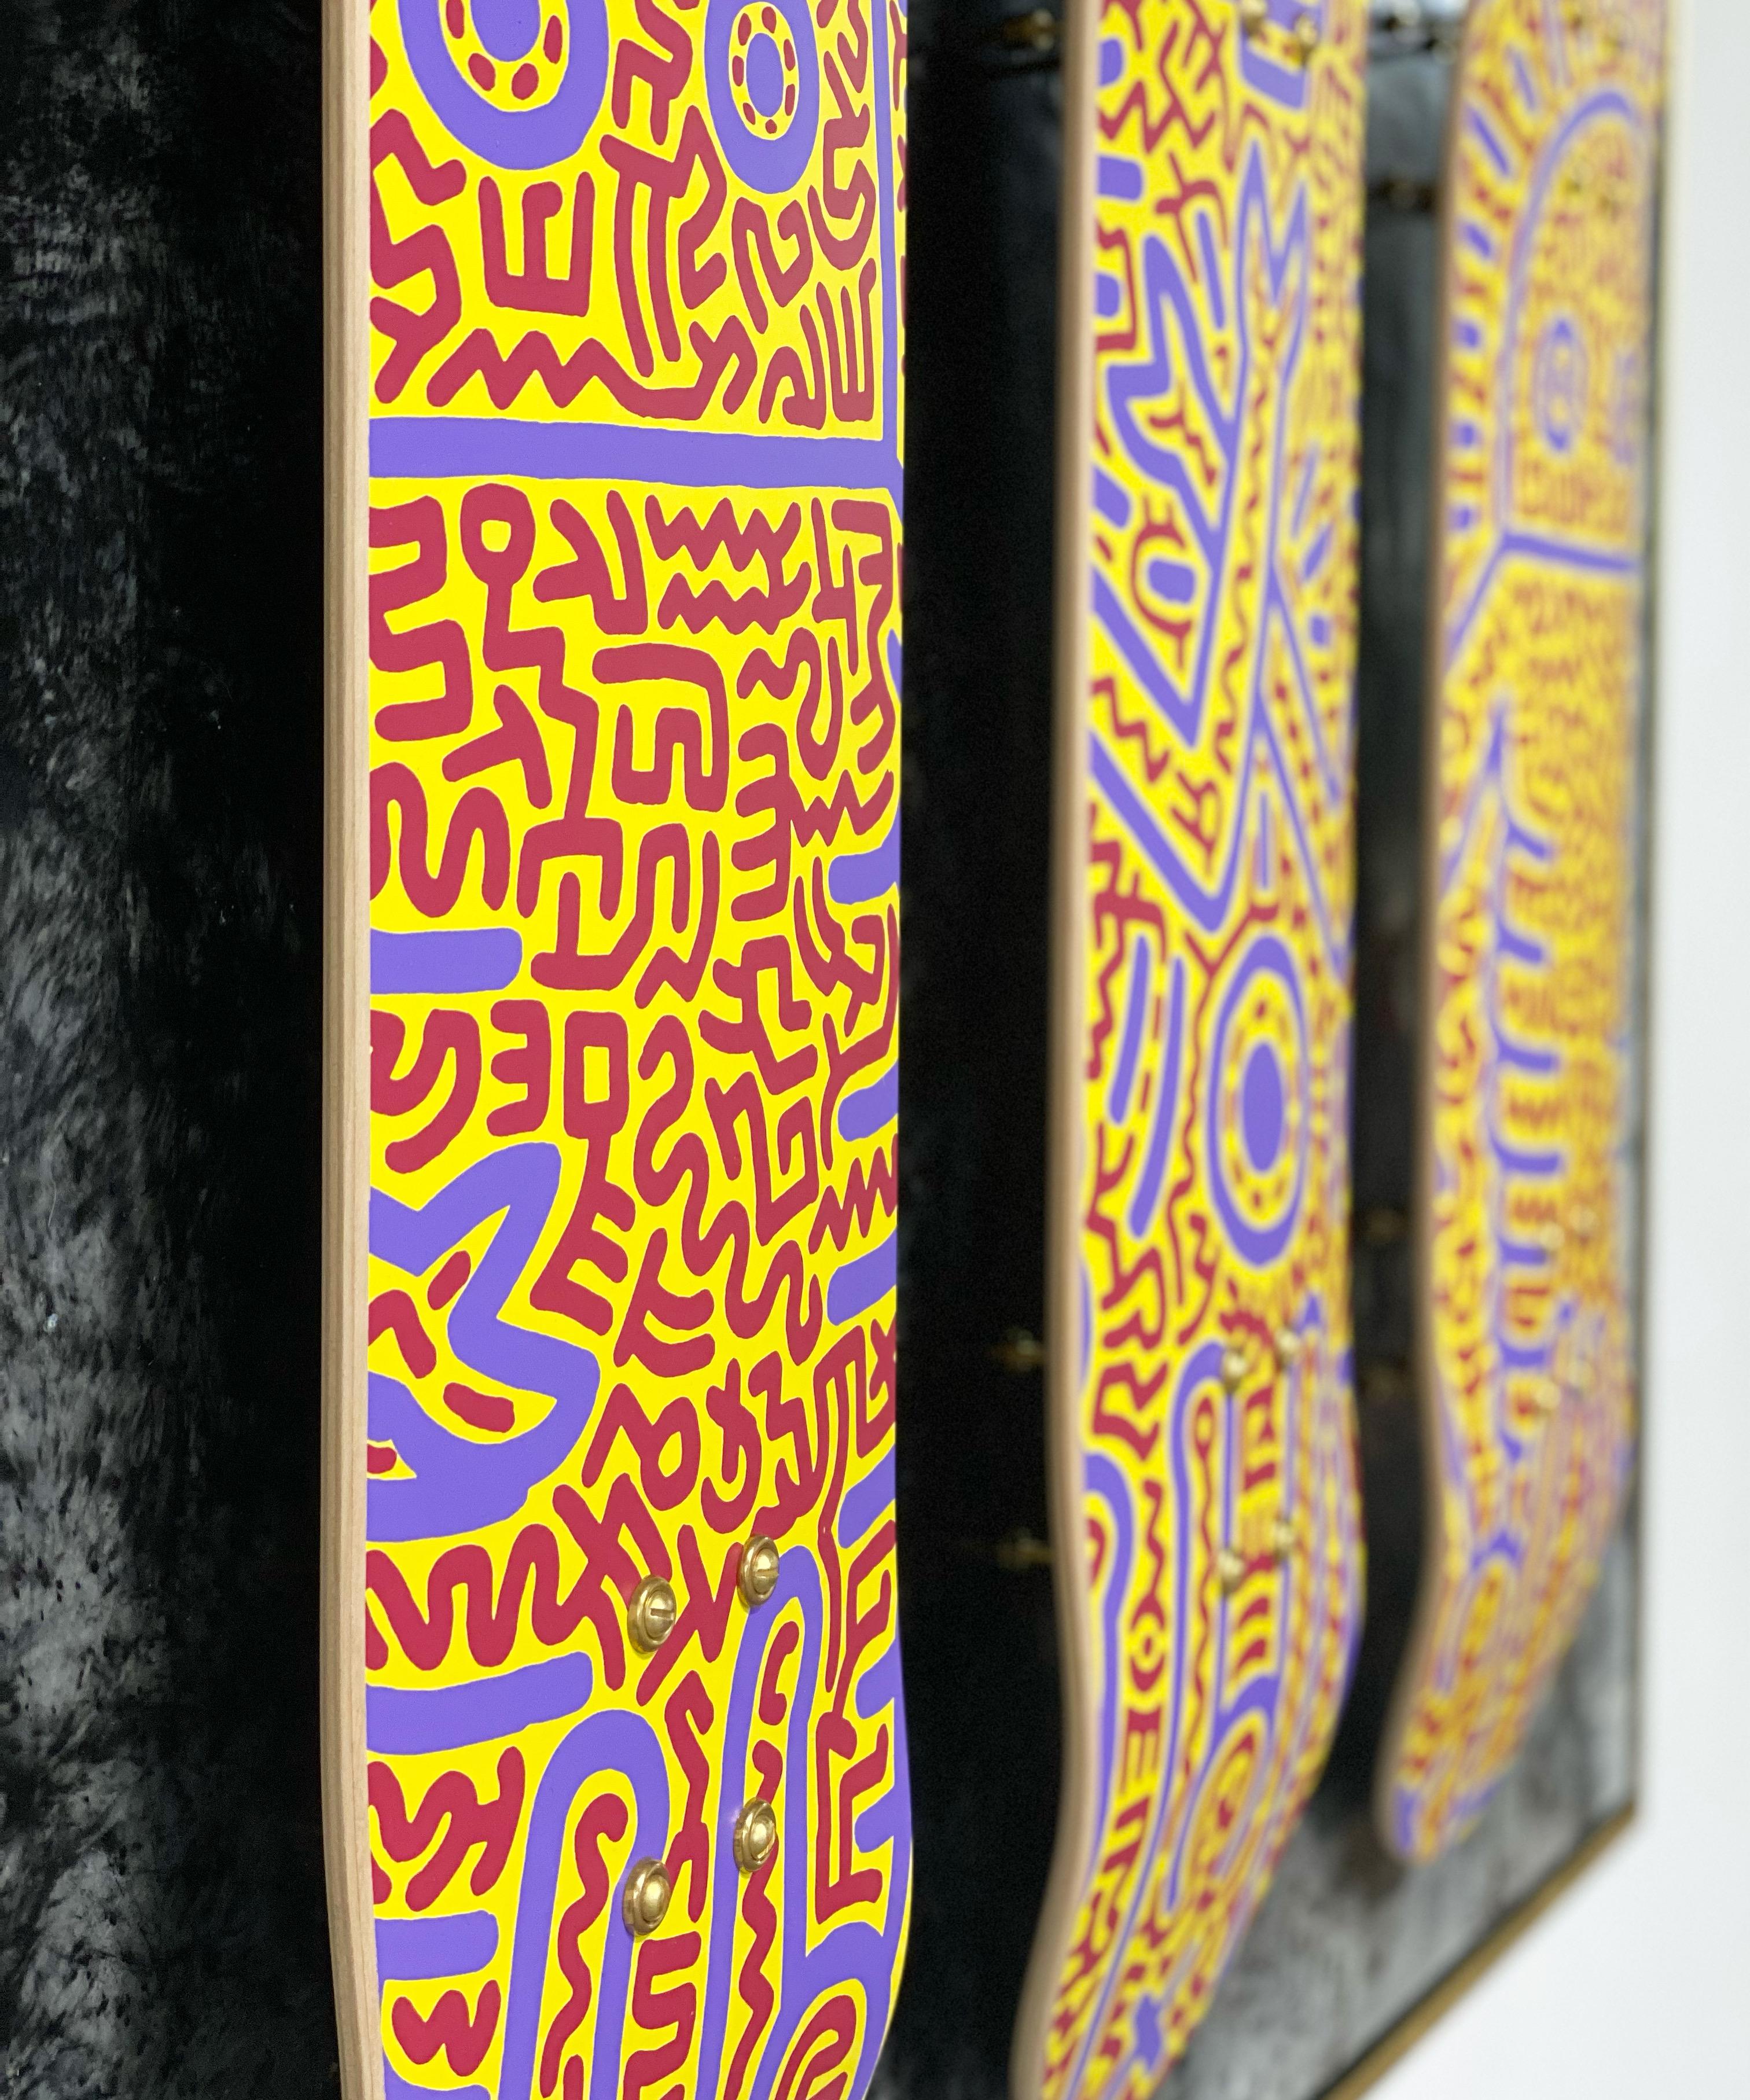 The Deck series. Screen-printed maple skate decks. Float-mounted on encaustic painted boards.This open edition set of 3 skate decks features Keith Haring's Untitled 1984 and was designed in 2019 by The Skateroom with the Keith Haring